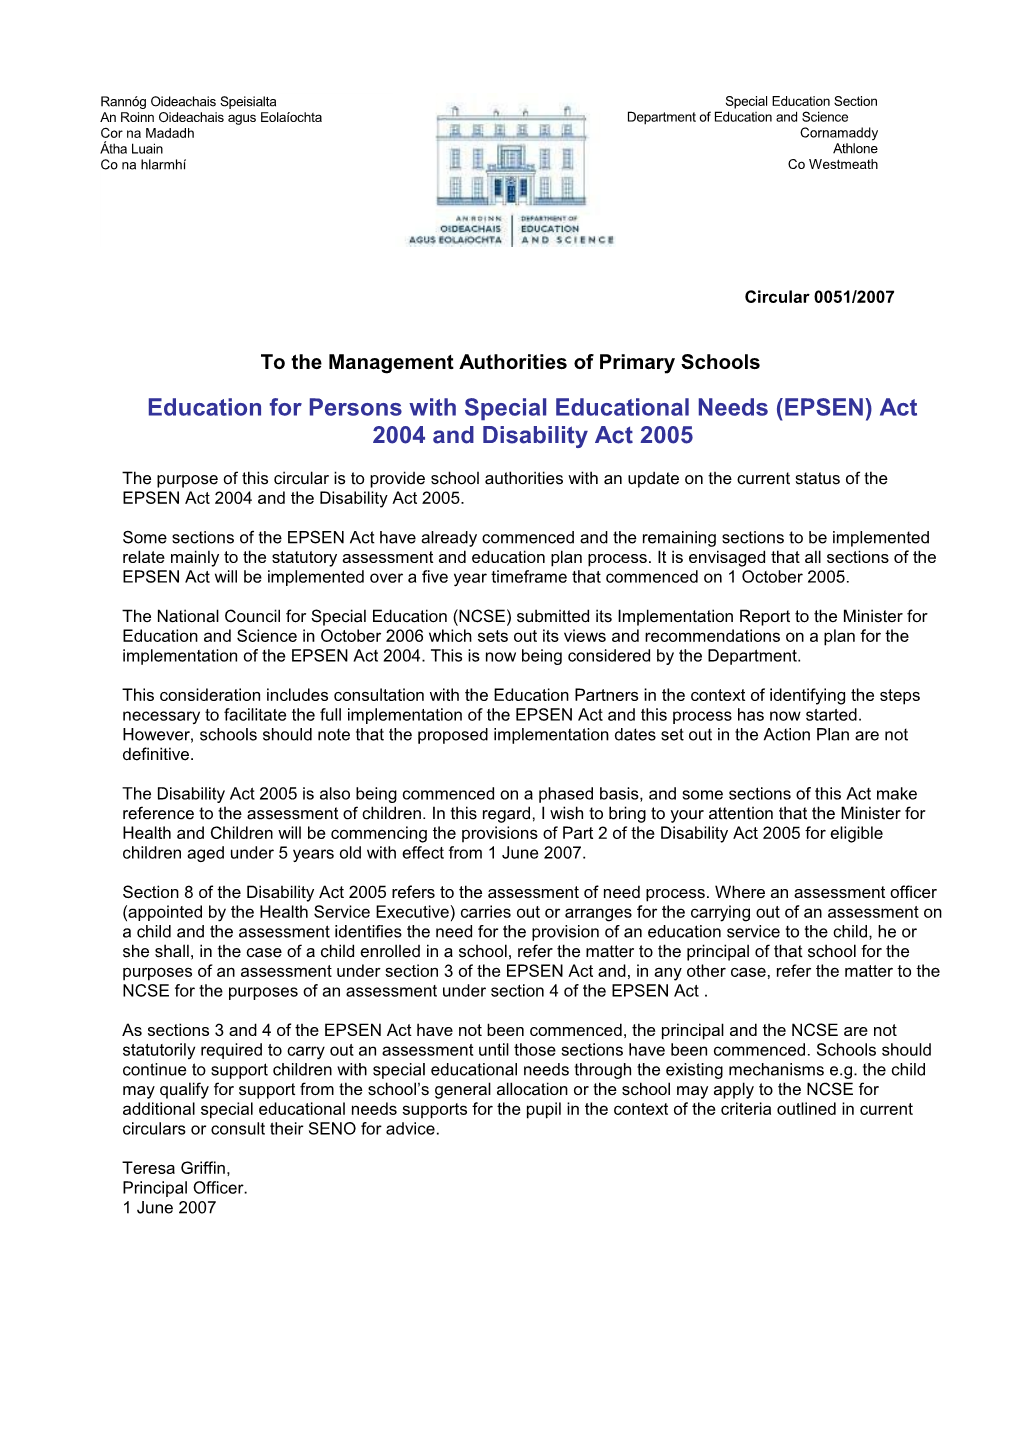 Circular 0051/2007 - Education for Persons with Special Educational Needs (EPSEN) Act 2004